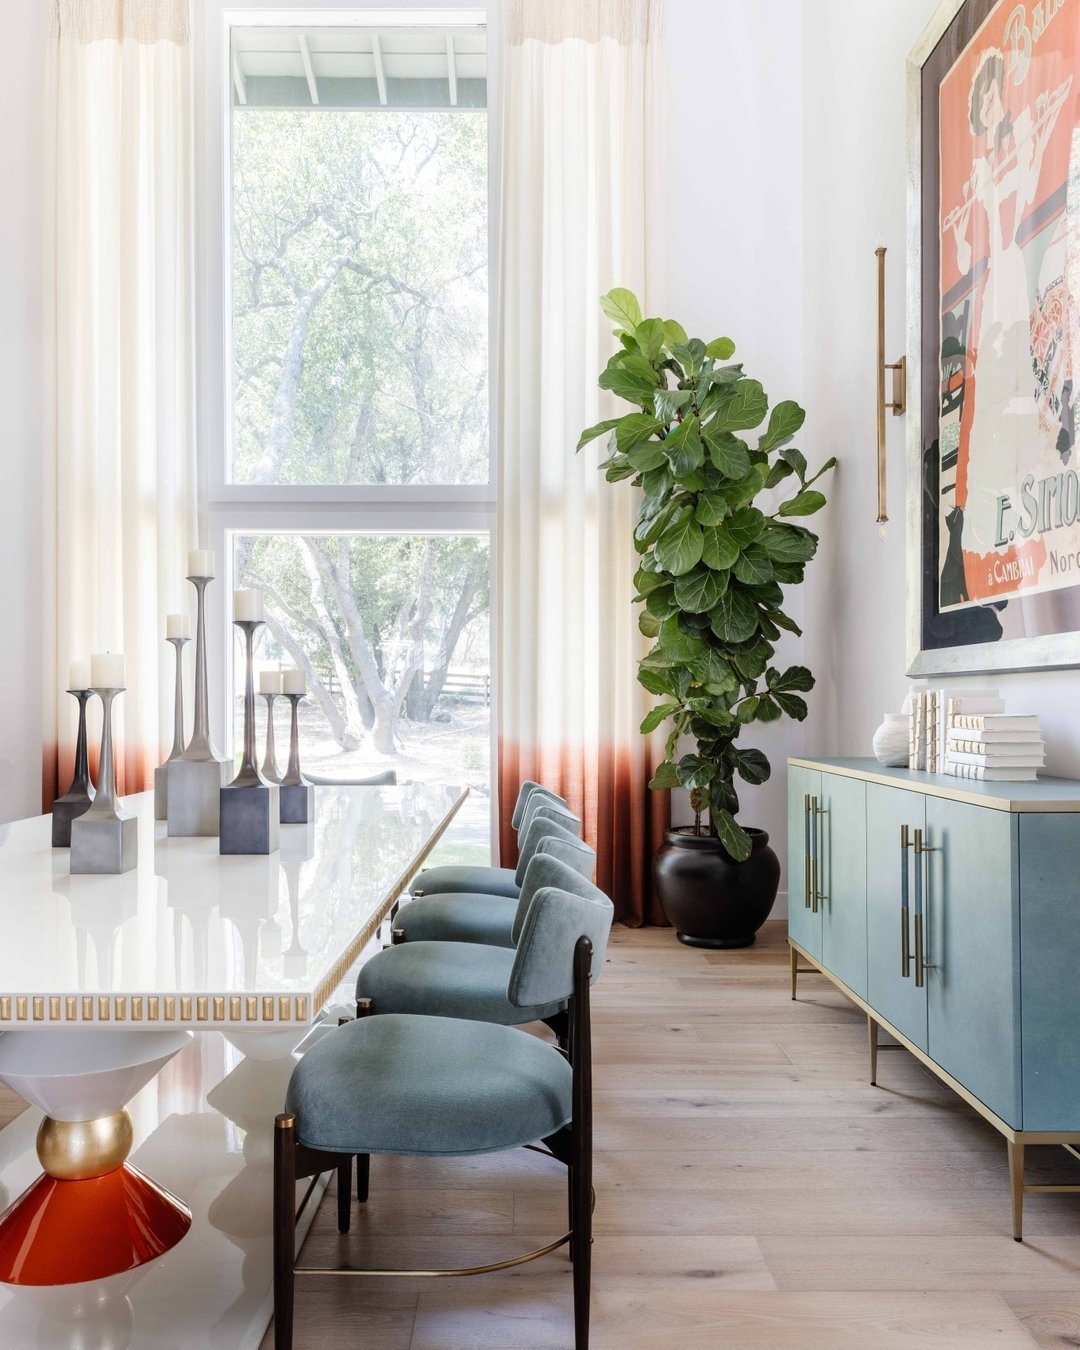 How do you design a home that feels like you? Kristen recently shared her take on creating a home that's full of character for @homesandgardensofficial:

&quot;To design a home that feels like you and reflects your personality, we encourage our clien